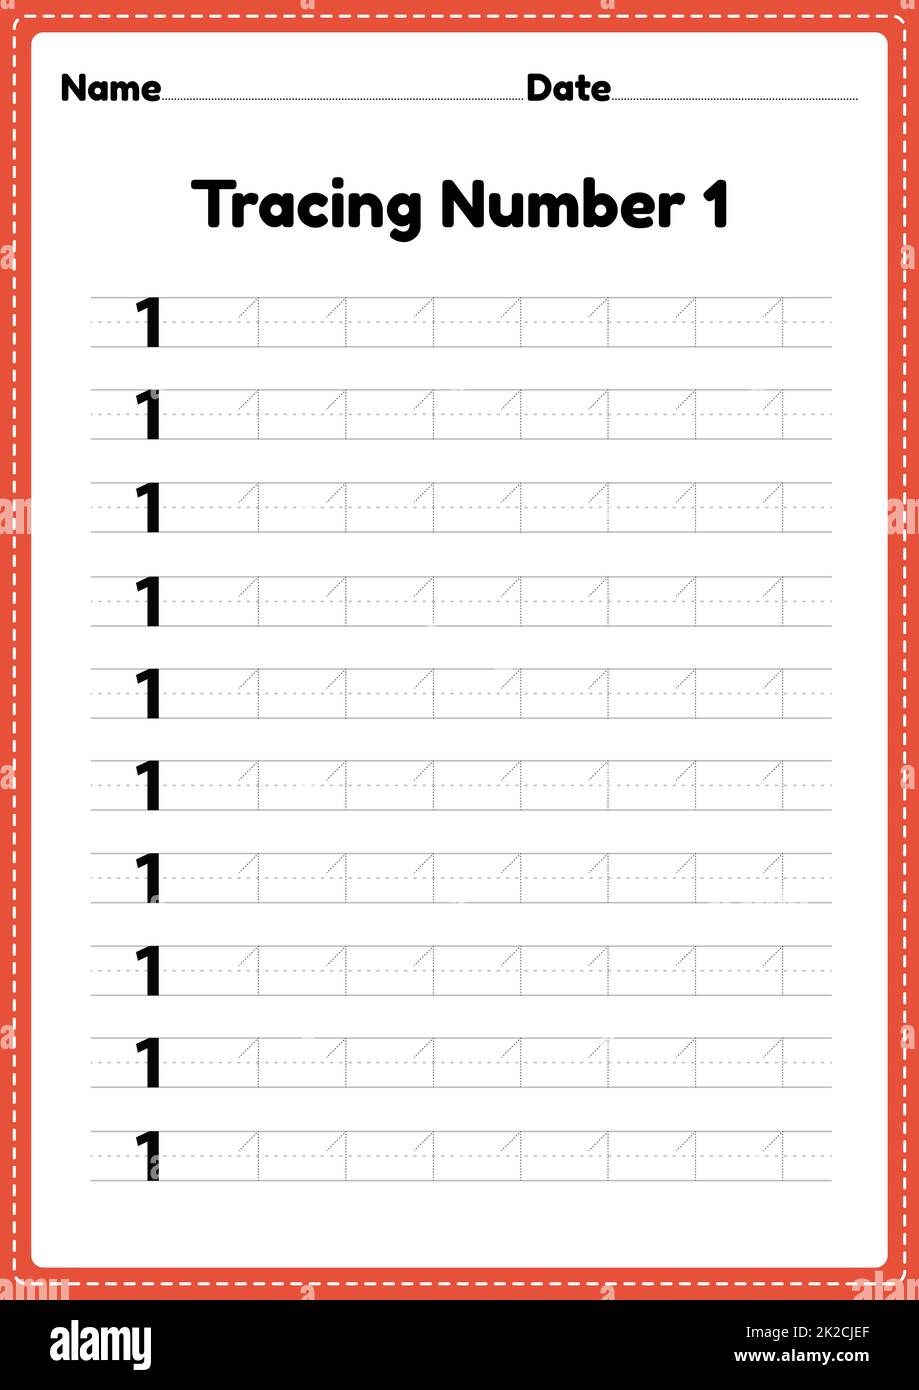 Tracing number 1 worksheet for kindergarten and preschool kids for educational handwriting practice in a printable page. Stock Photo